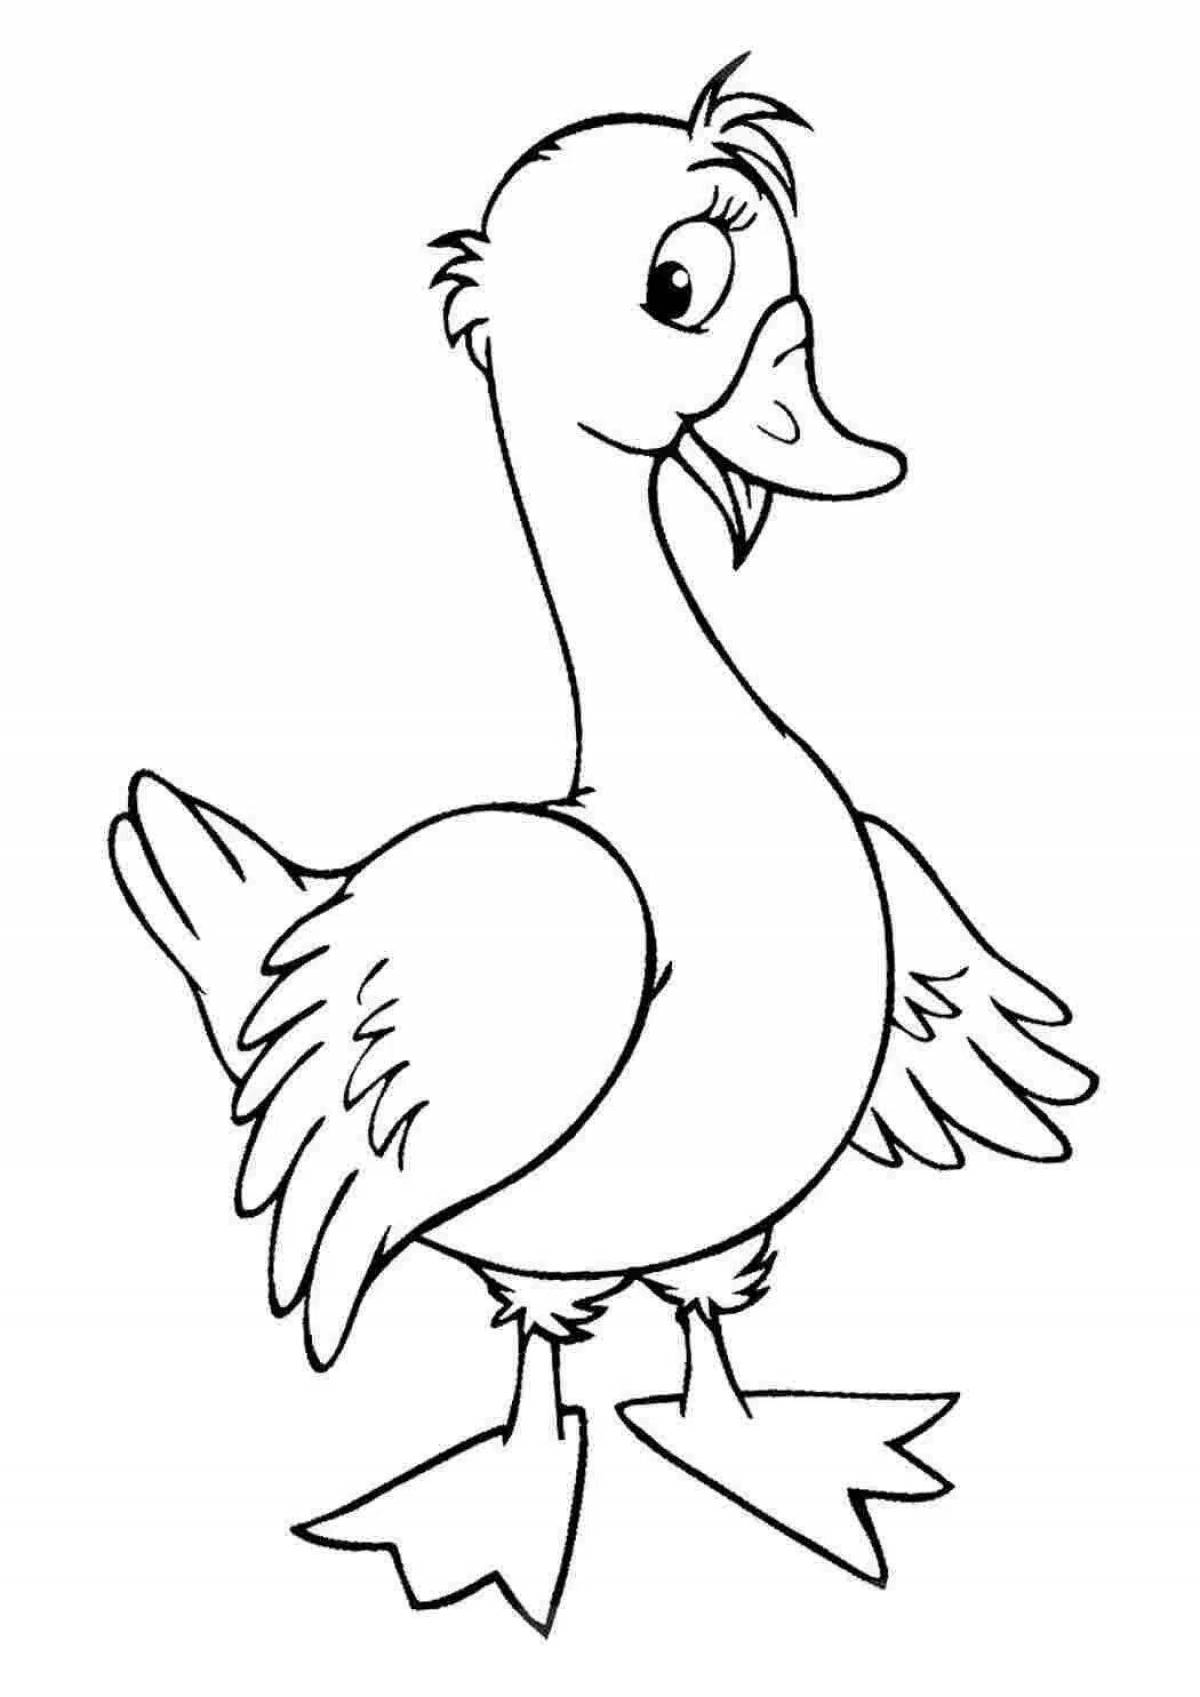 Fat goose coloring page